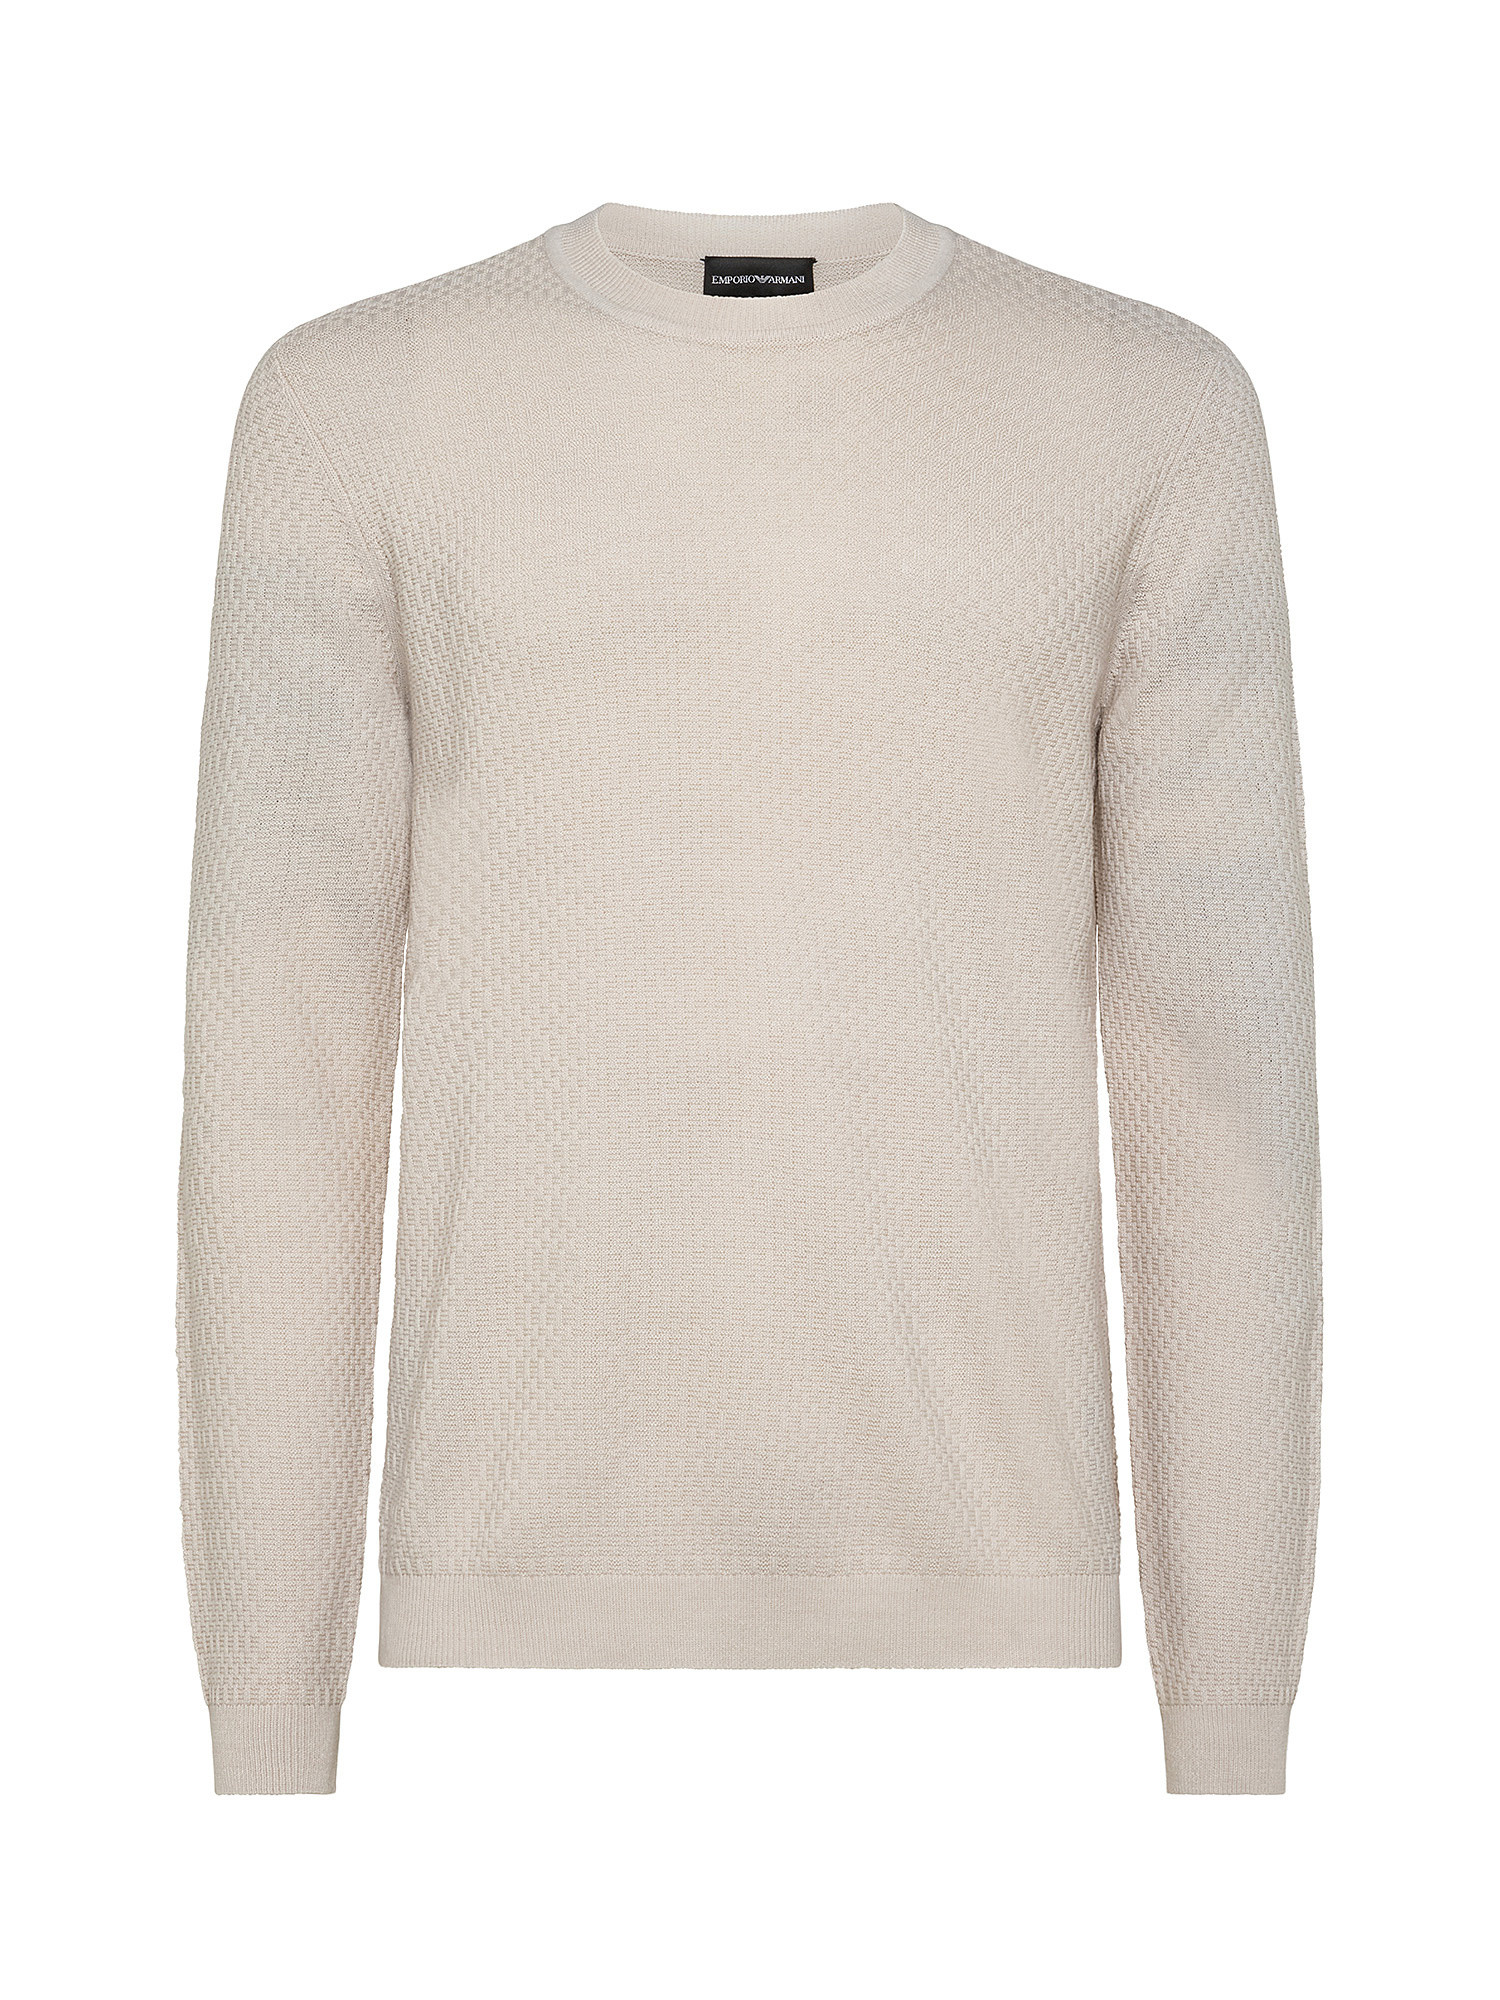 Crewneck sweater in wool blend, White Cream, large image number 0